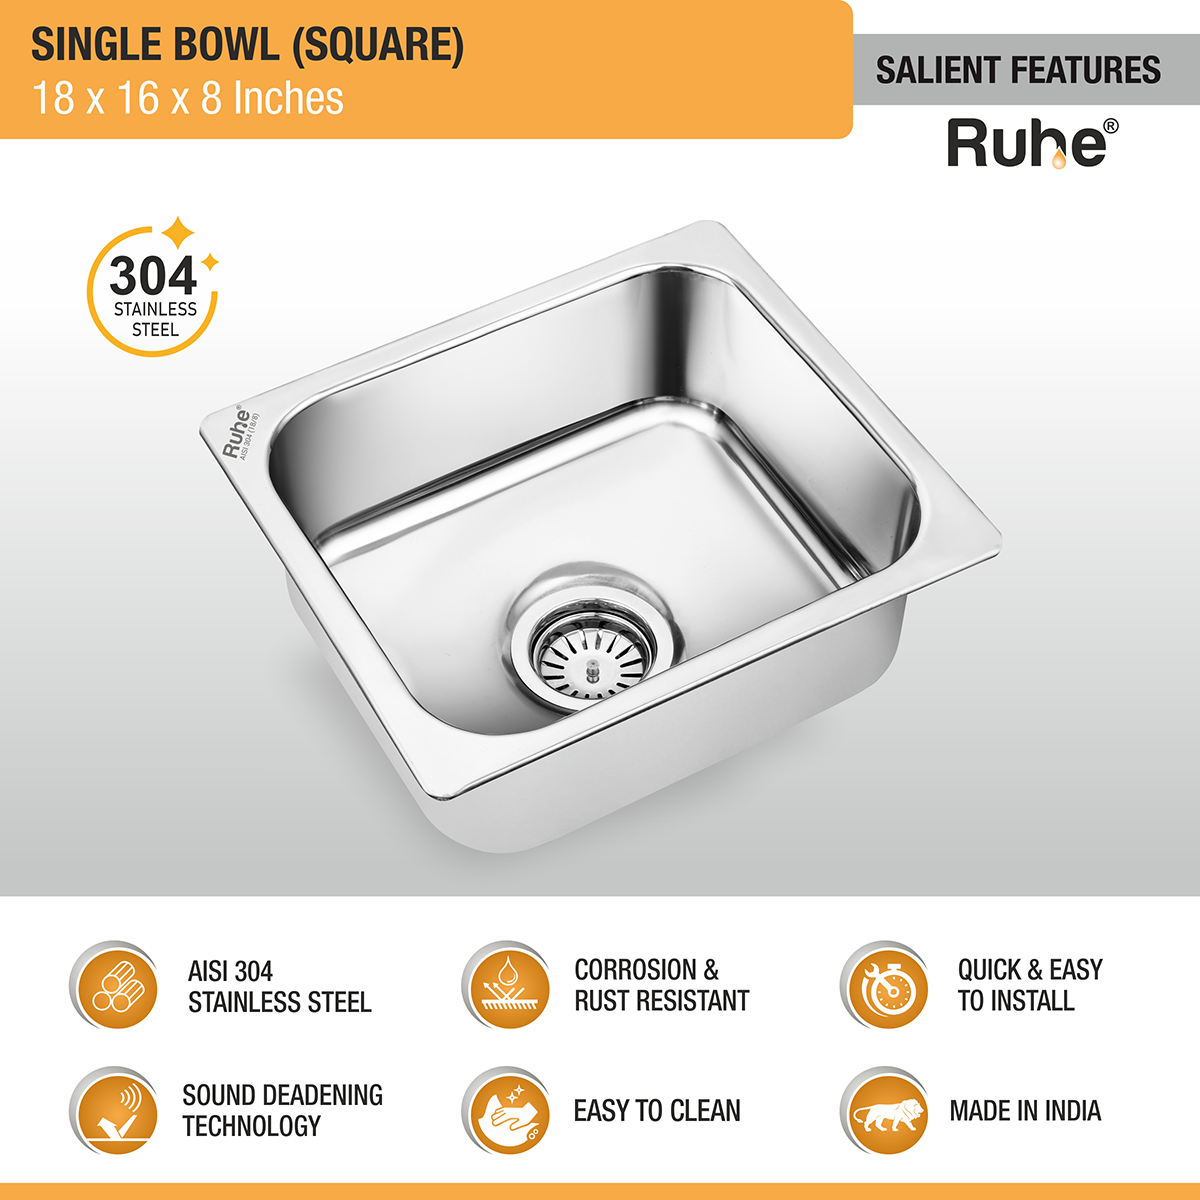 Square Single Bowl (18 x 16 x 8 inches) 304-Grade Kitchen Sink features and benefits